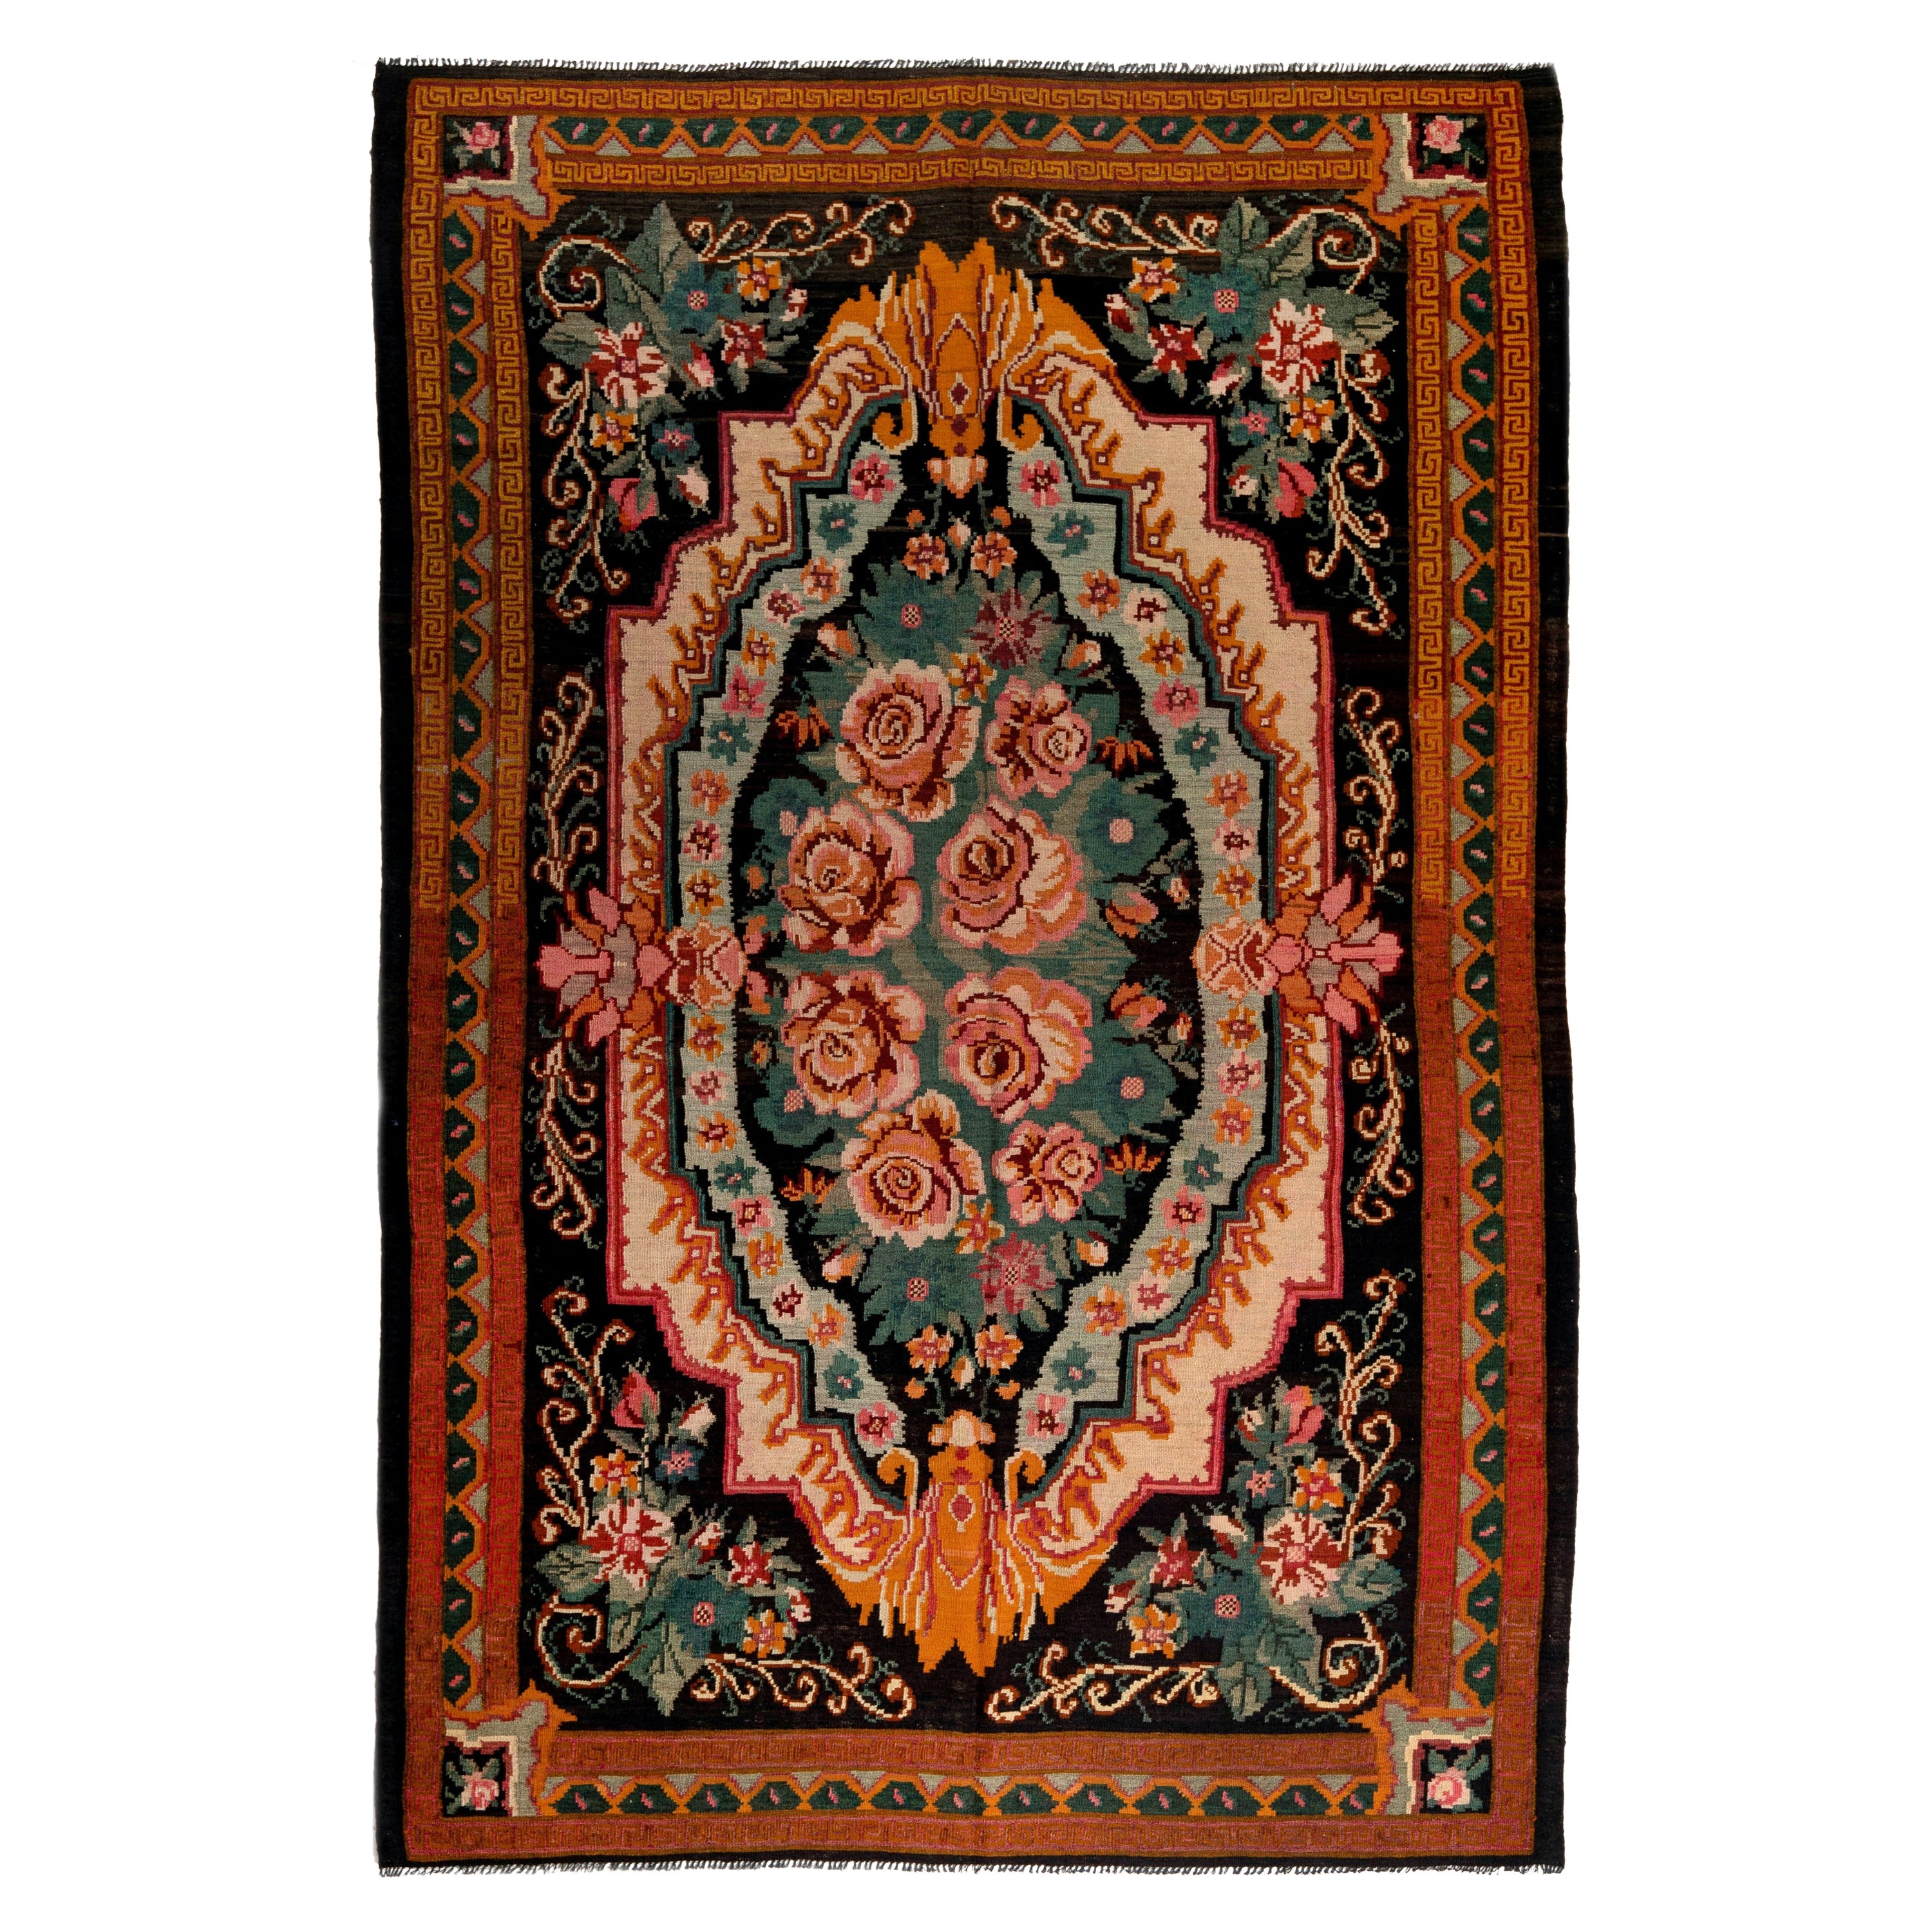 6.9x10.2 Ft Vintage Floral Bessarabian Kilim, Handwoven Wool Rug from Moldova For Sale